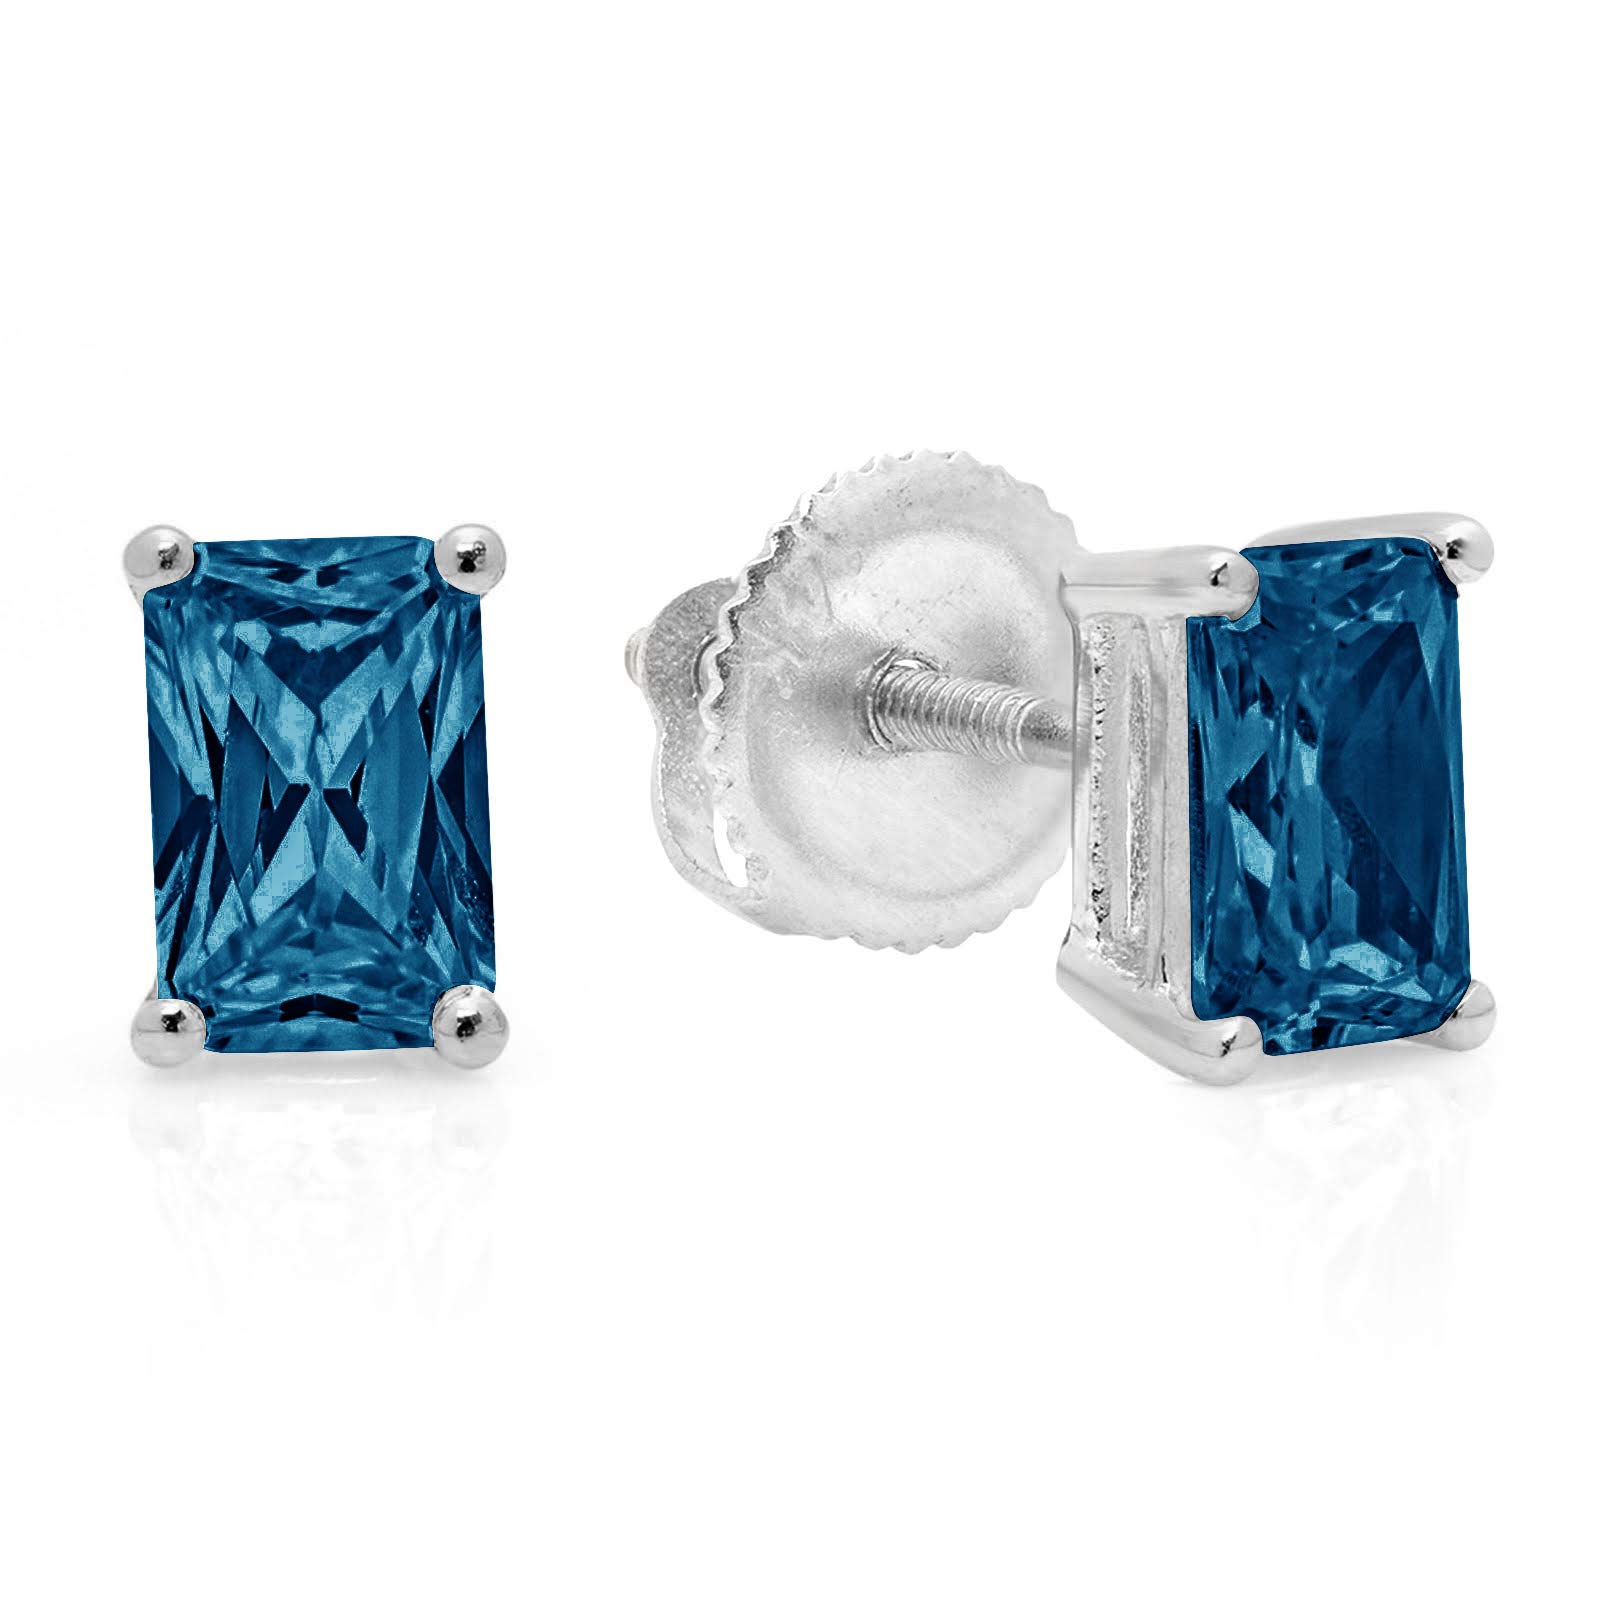 0.9ct Emerald Cut Solitaire Natural Royal Blue Topaz gemstone Unisex Designer Stud Earrings Solid 14k White Gold Screw Back conflict free Jewelry